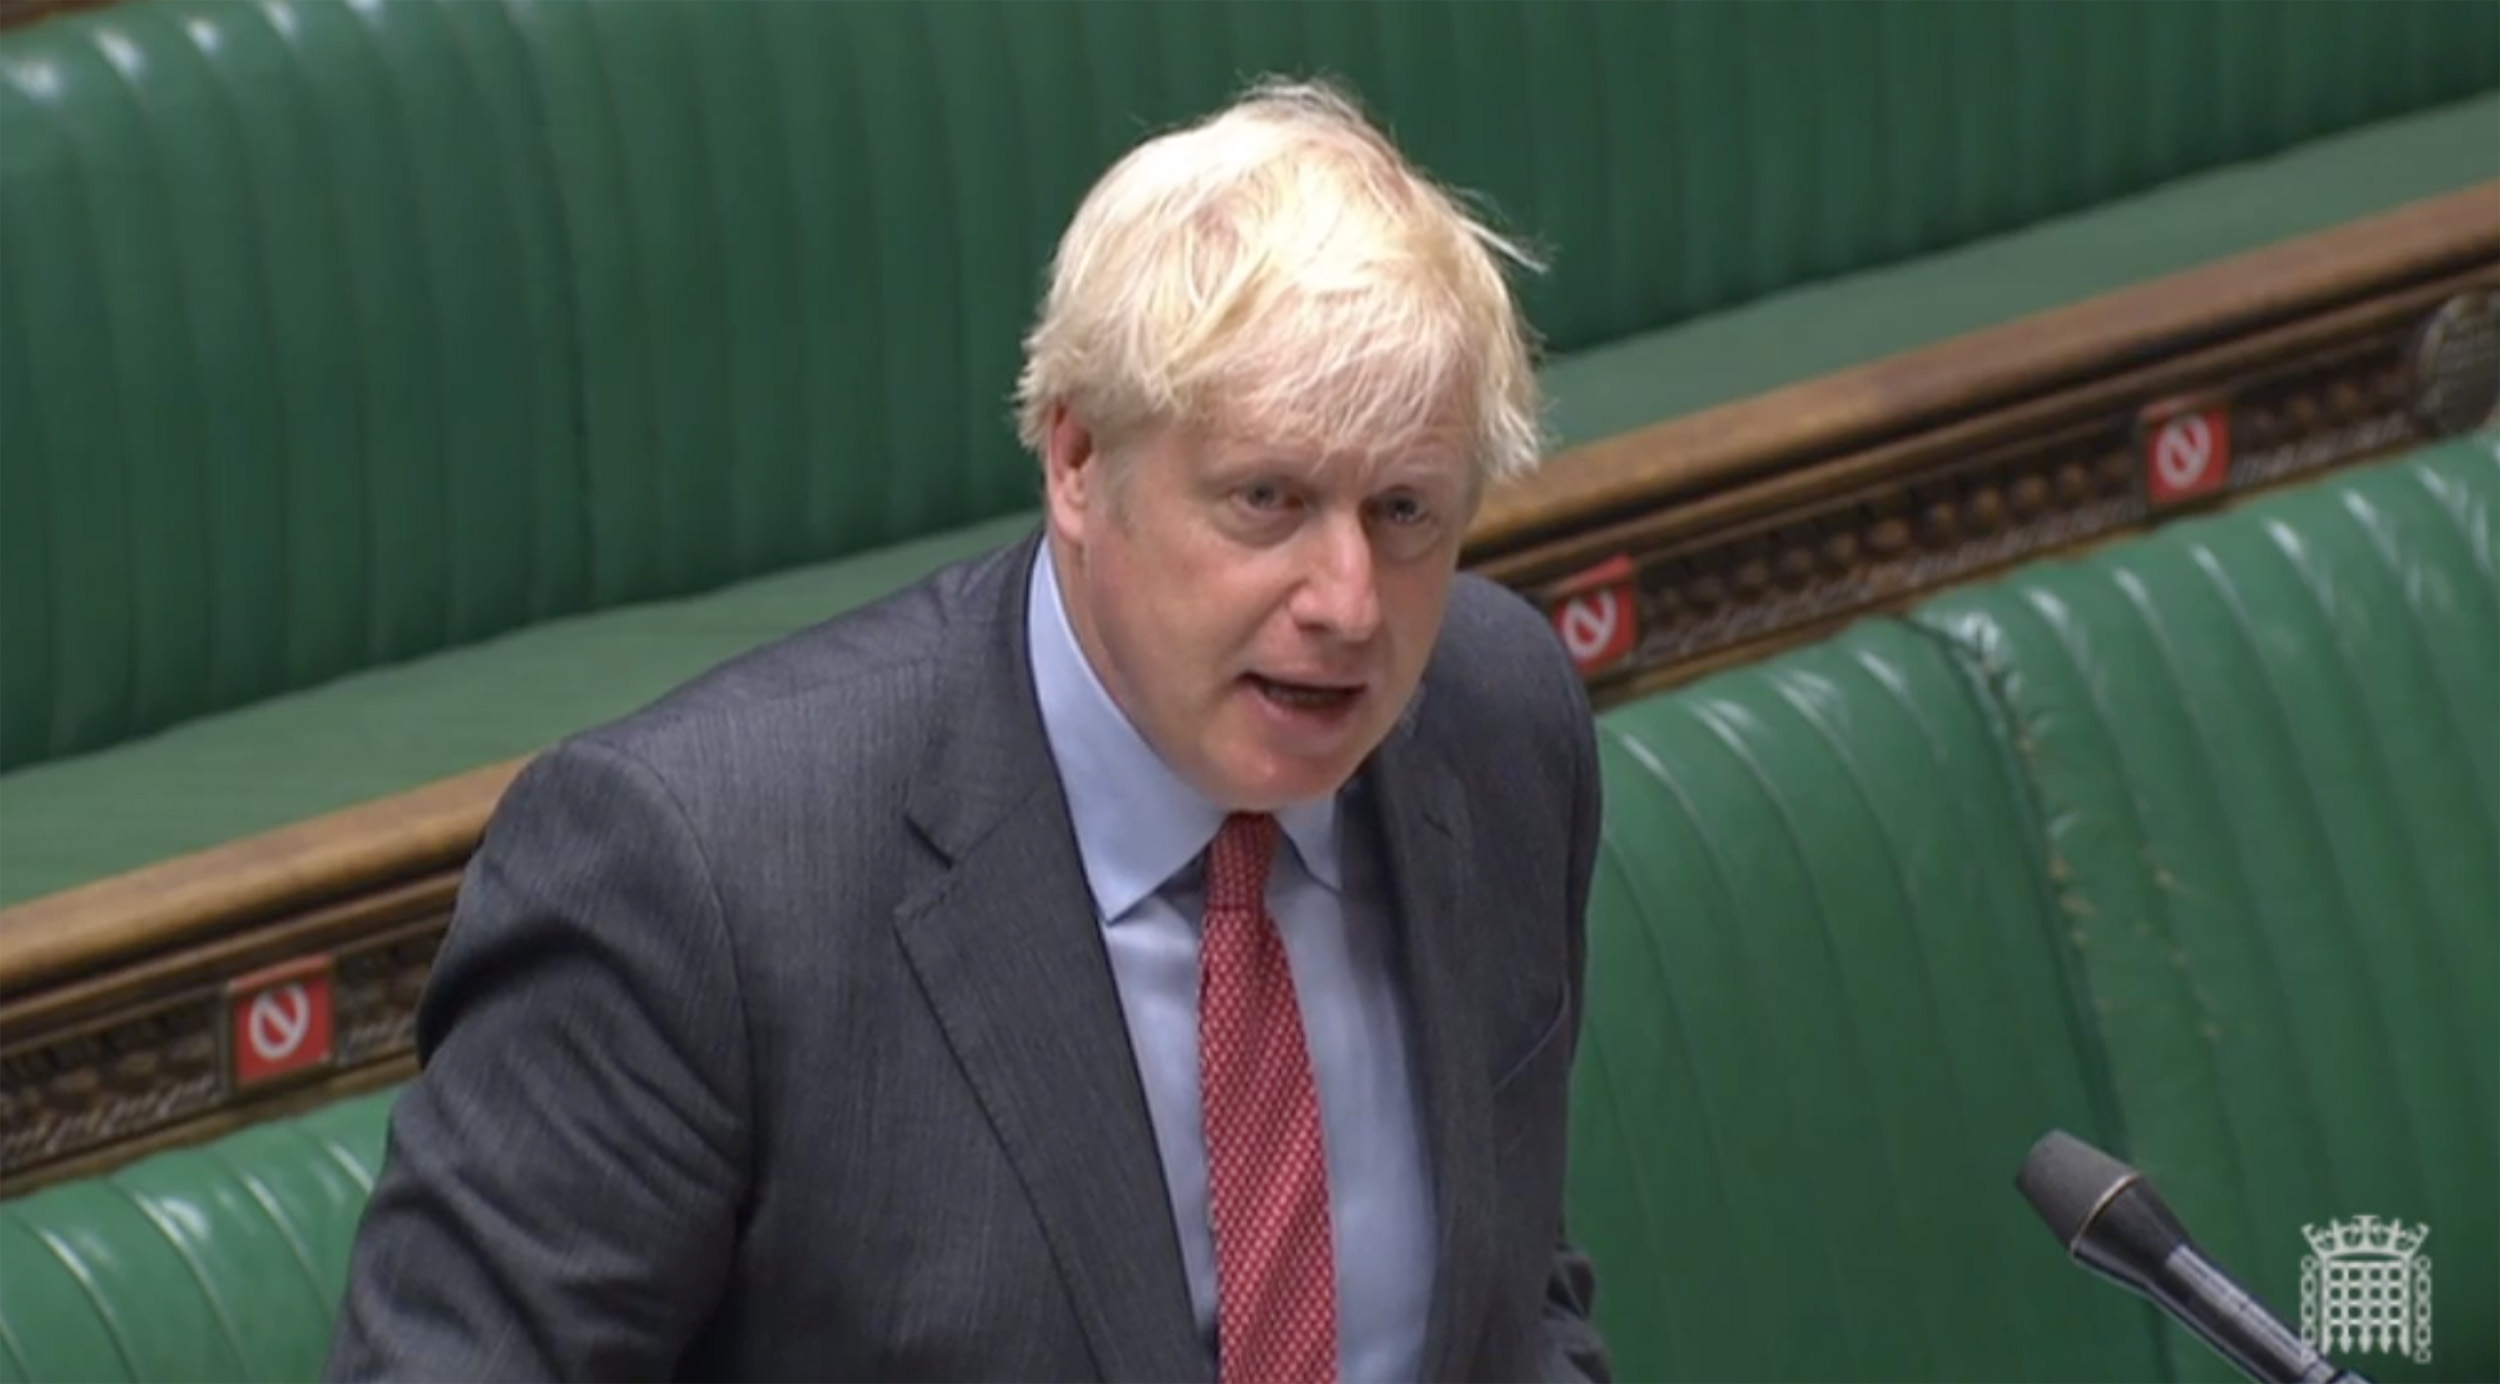 British Prime Minister Boris Johnson speaks in Parliament in London, on Tuesday.